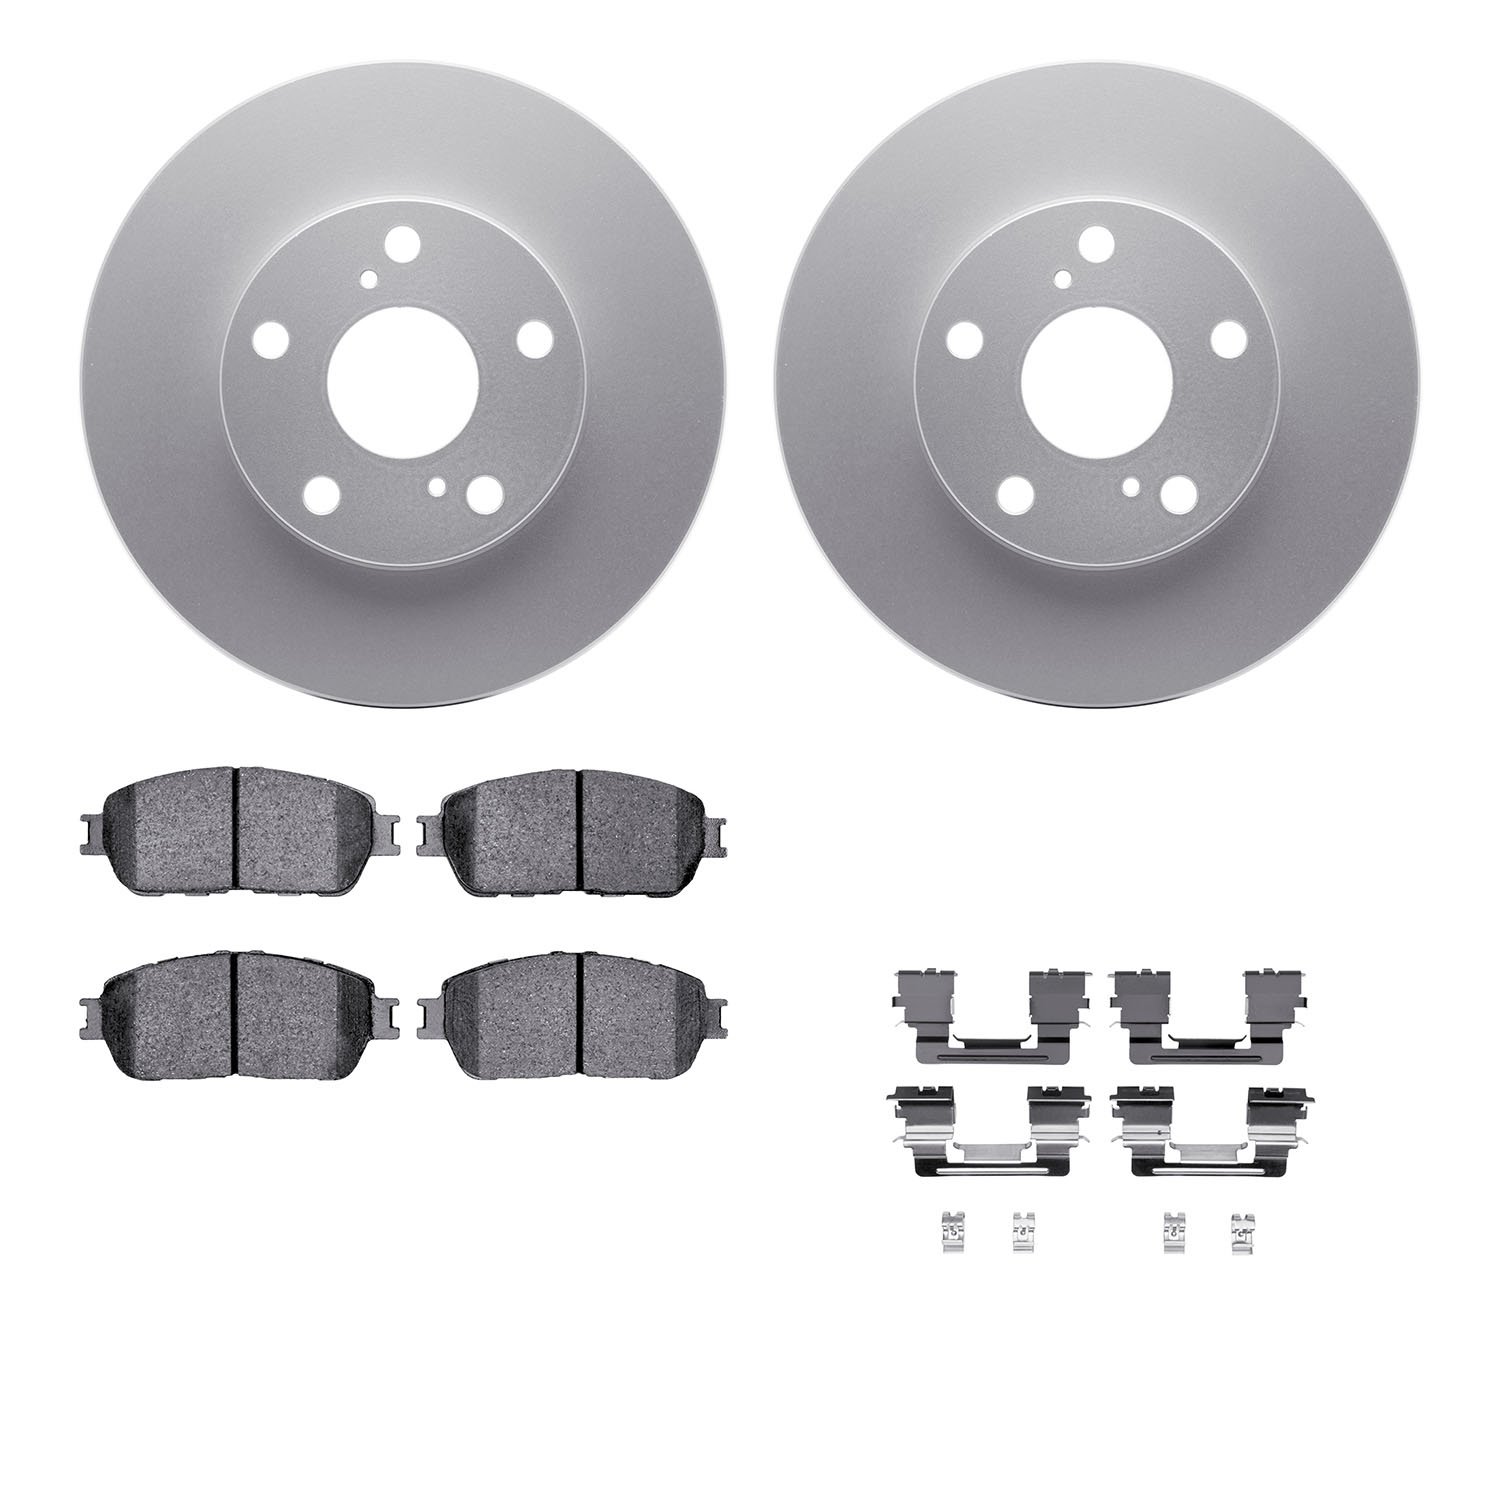 4412-76012 Geospec Brake Rotors with Ultimate-Duty Brake Pads & Hardware, 2005-2015 Lexus/Toyota/Scion, Position: Front